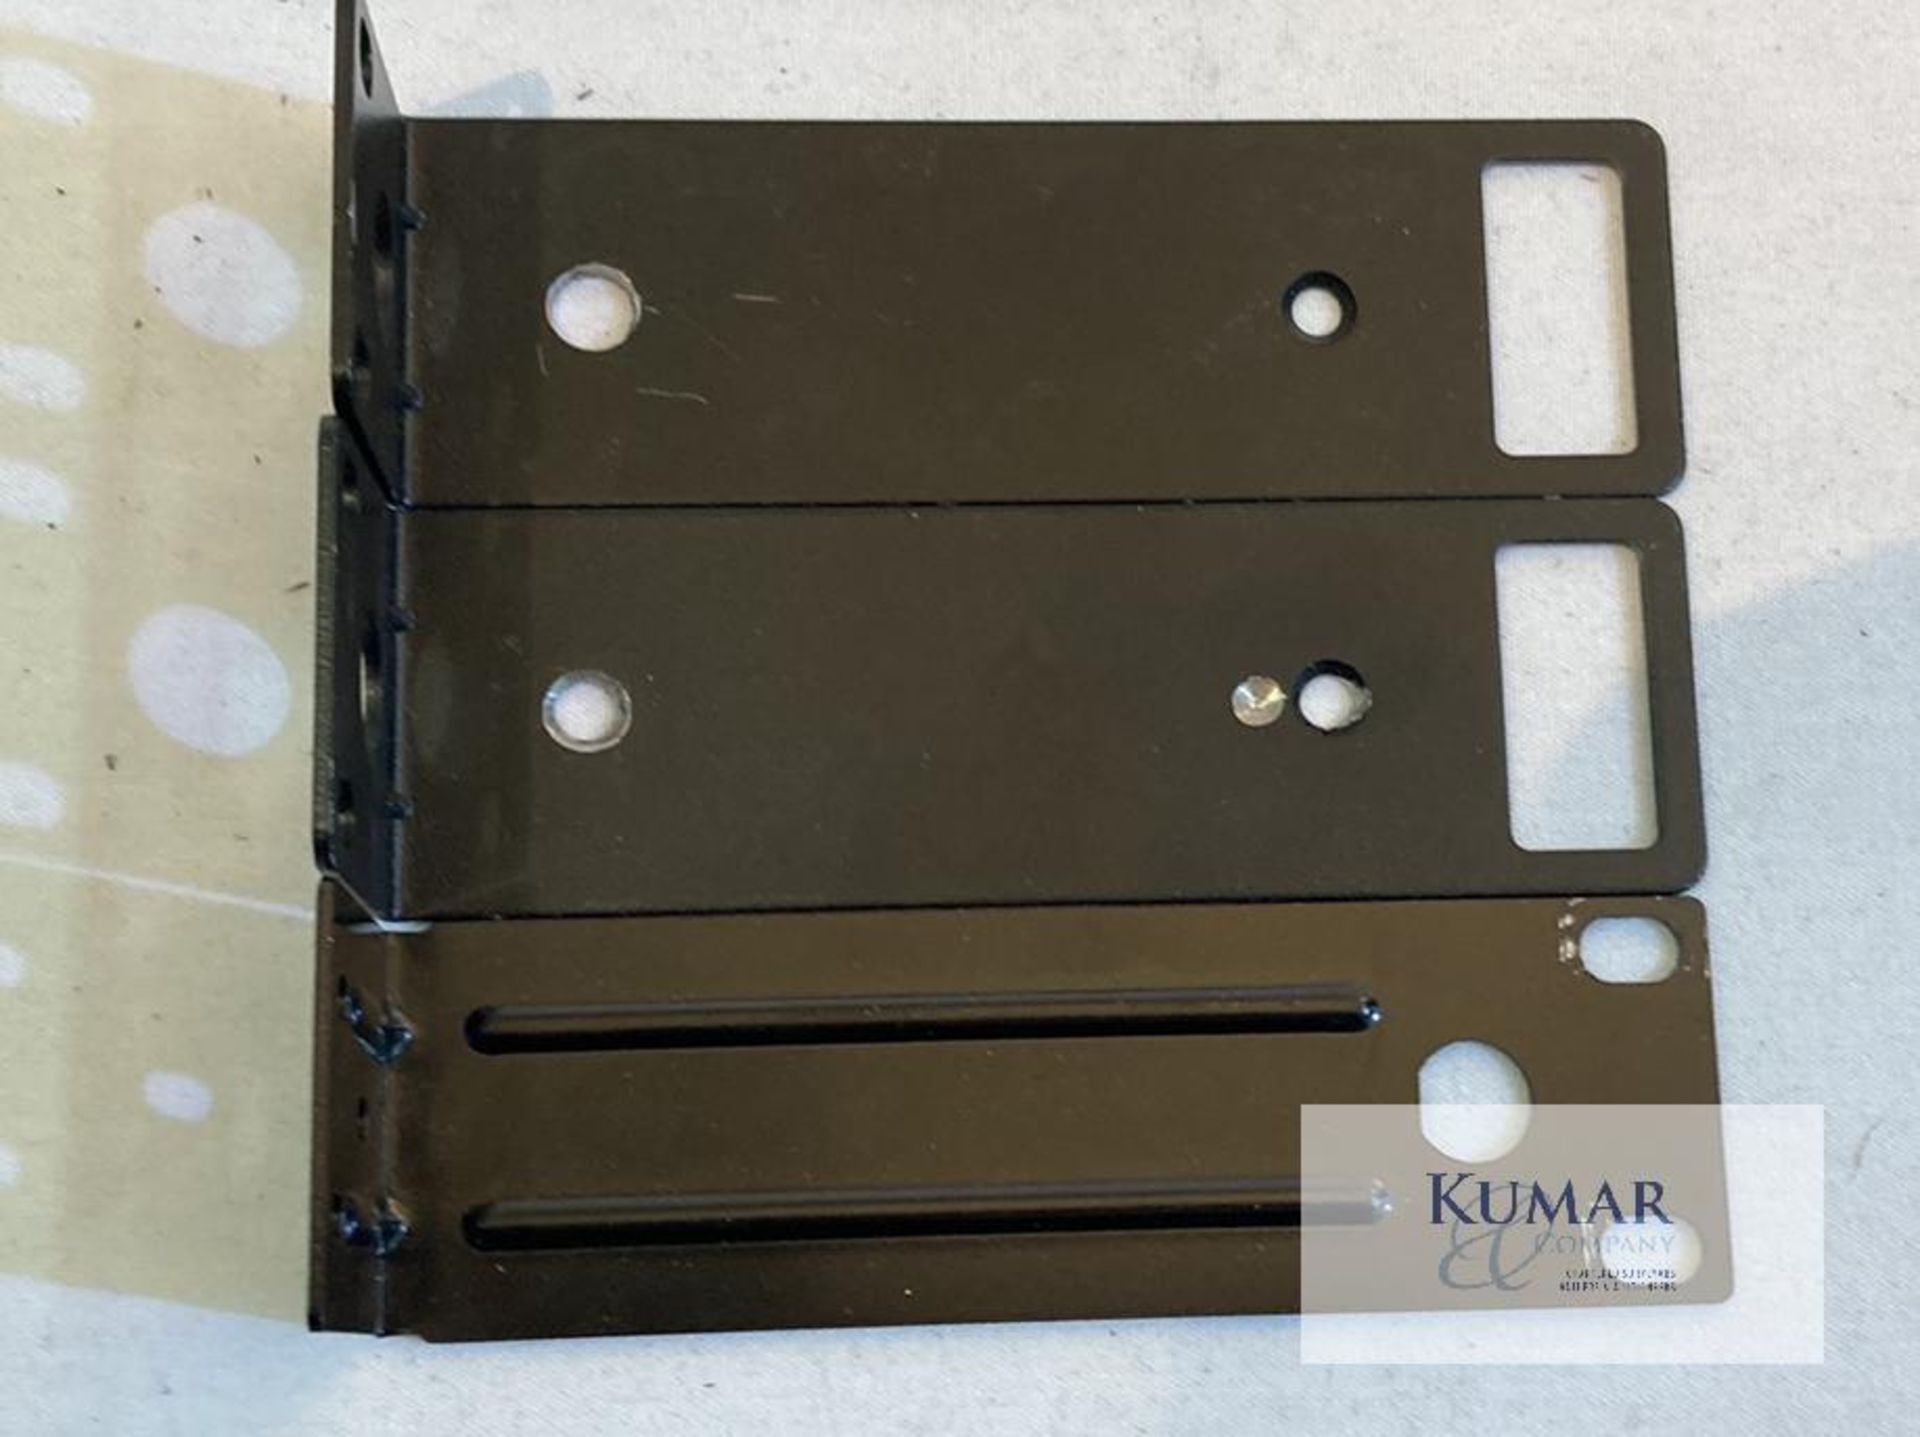 19" rack blanking plate and mounting assortment Description: Assortment of 19" blanking plates - Image 6 of 15